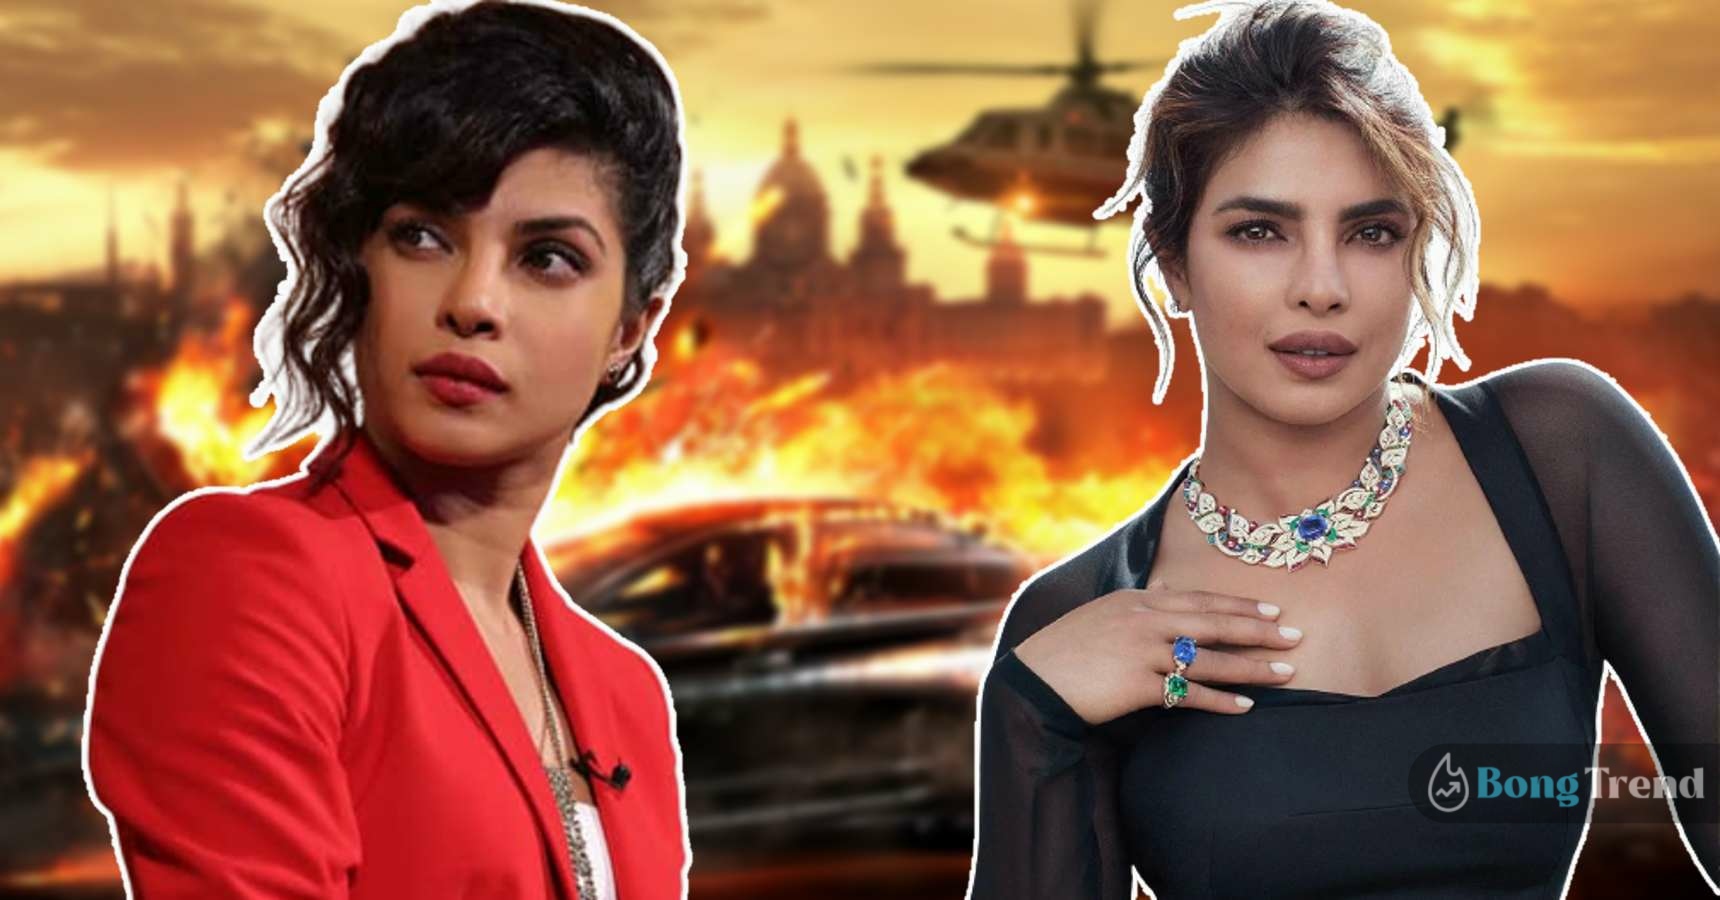 Priyanka Chopra once bullied for being brown now ruling Bollywood to Hollywood